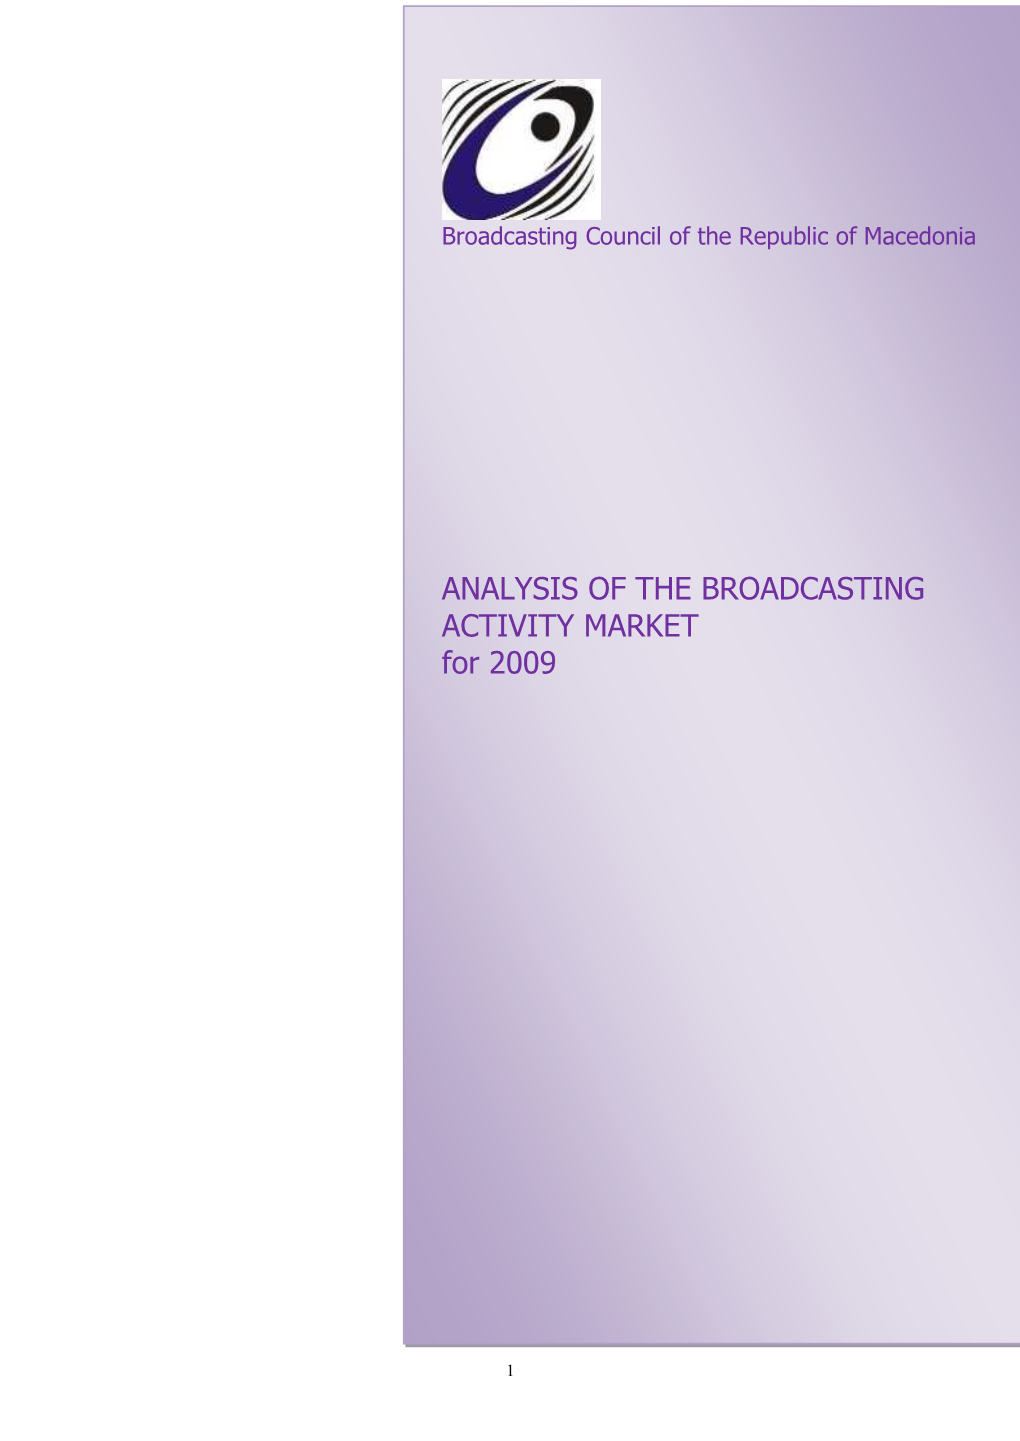 ANALYSIS of the BROADCASTING ACTIVITY MARKET for 2009